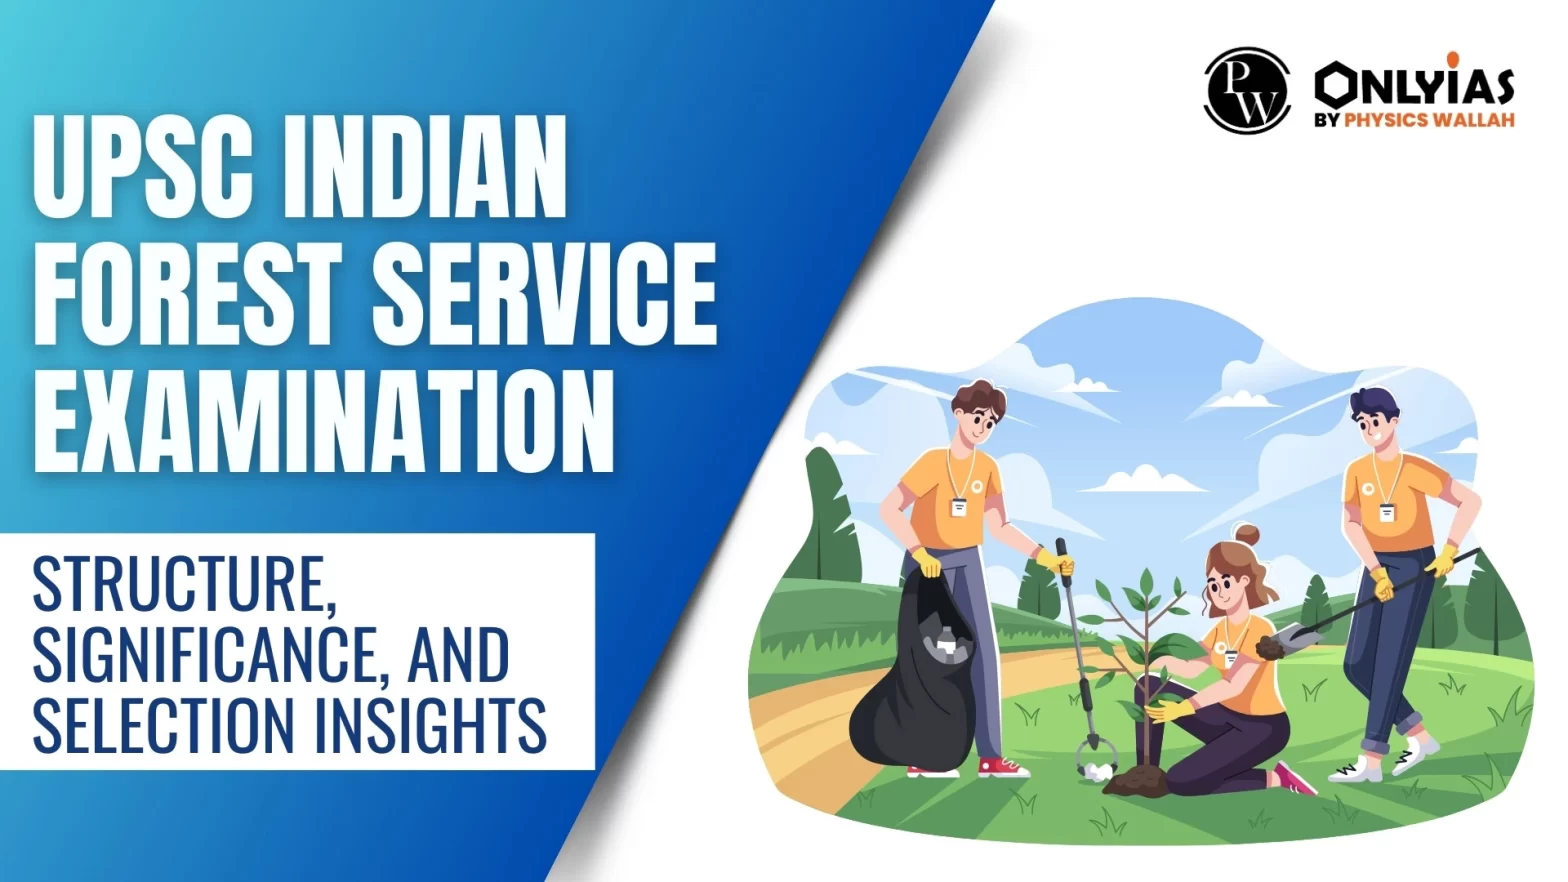 UPSC Indian Forest Service Examination: Structure, Significance, and Selection Insights